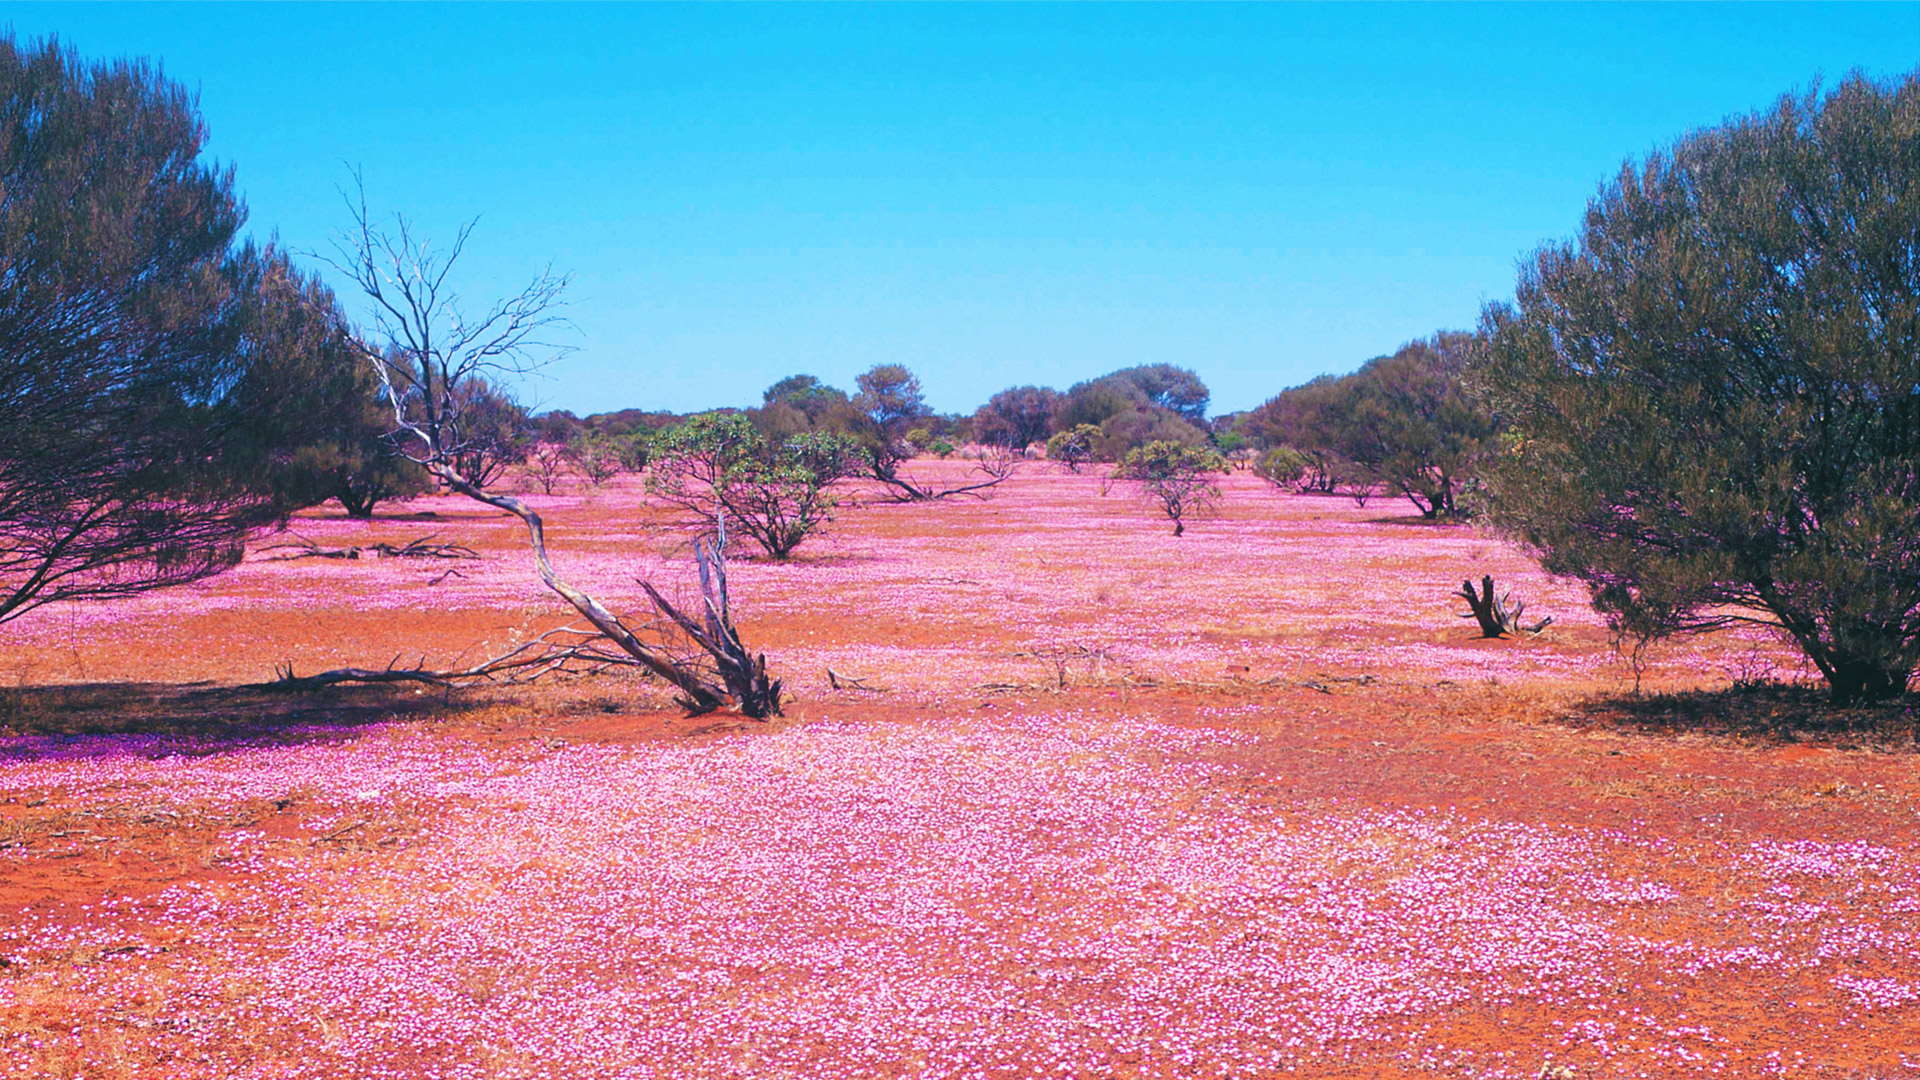 field of pink wildflowers in the golden outback